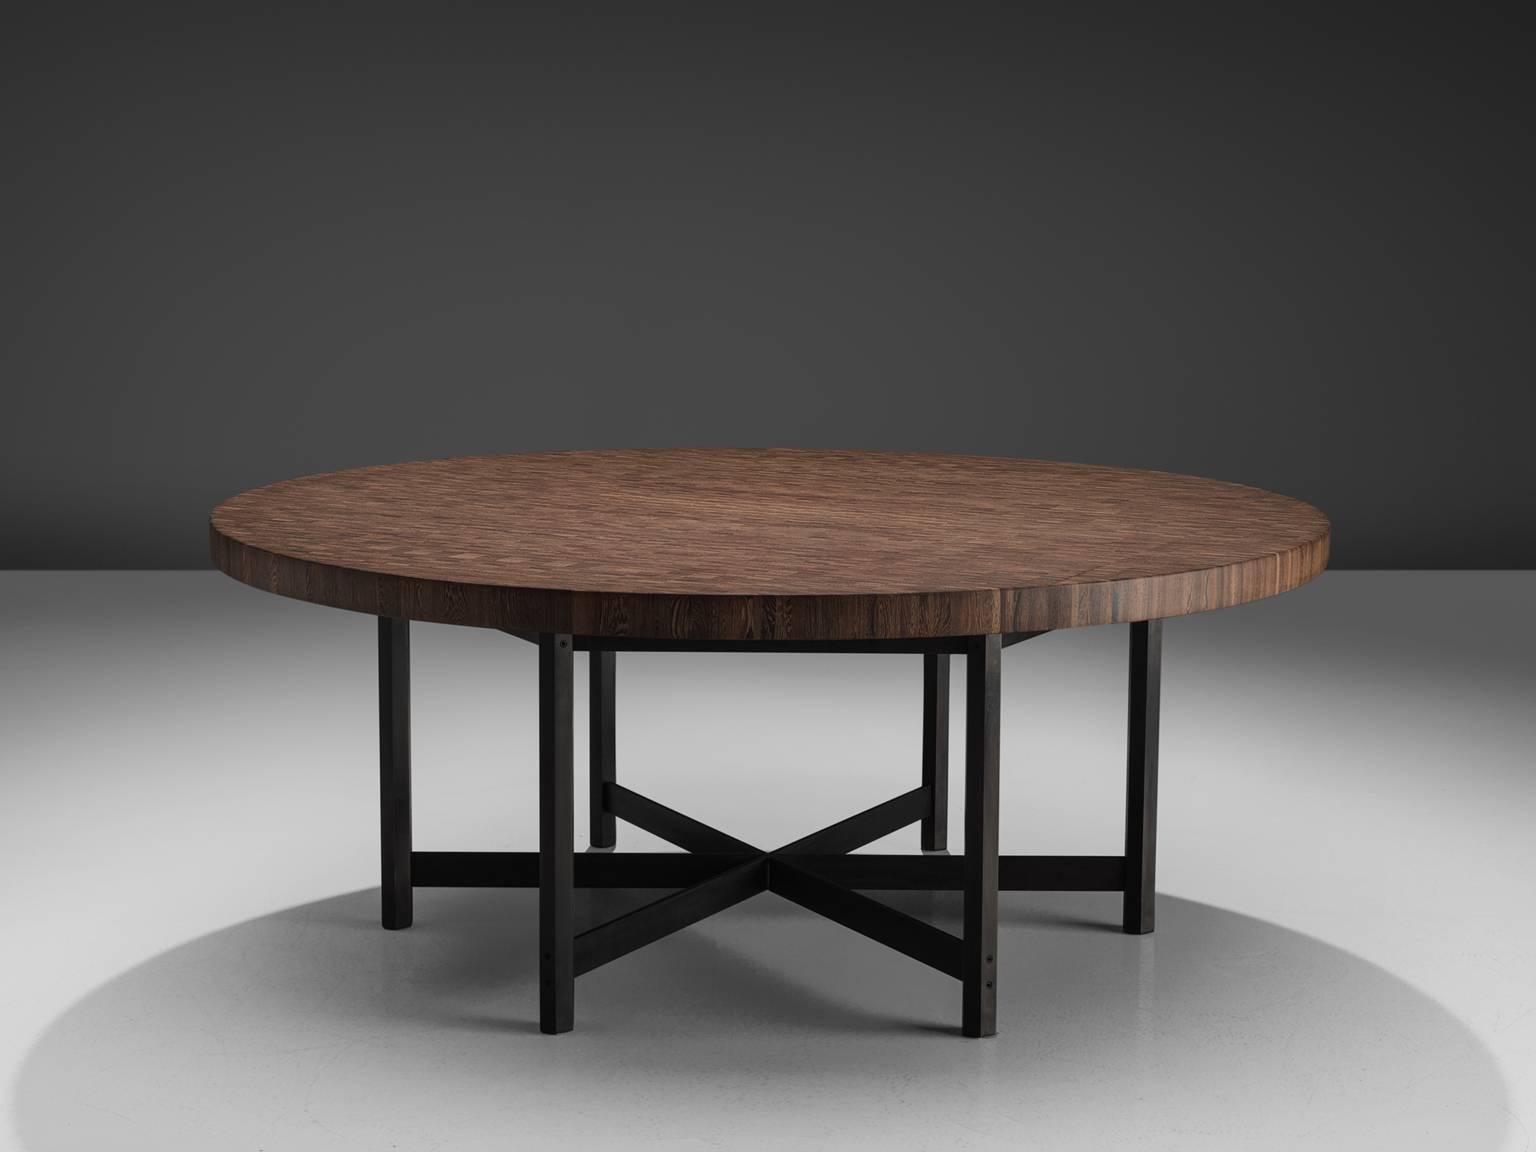 Jules Wabbes for Mobilier Universel, wenge and metal with canon de fusil metal, Belgium, 1960s. 

This large wenge table is one of Jules Wabbes personal favorites. The top is executed with wenge end-grain wood top. End-grain cut is particularly